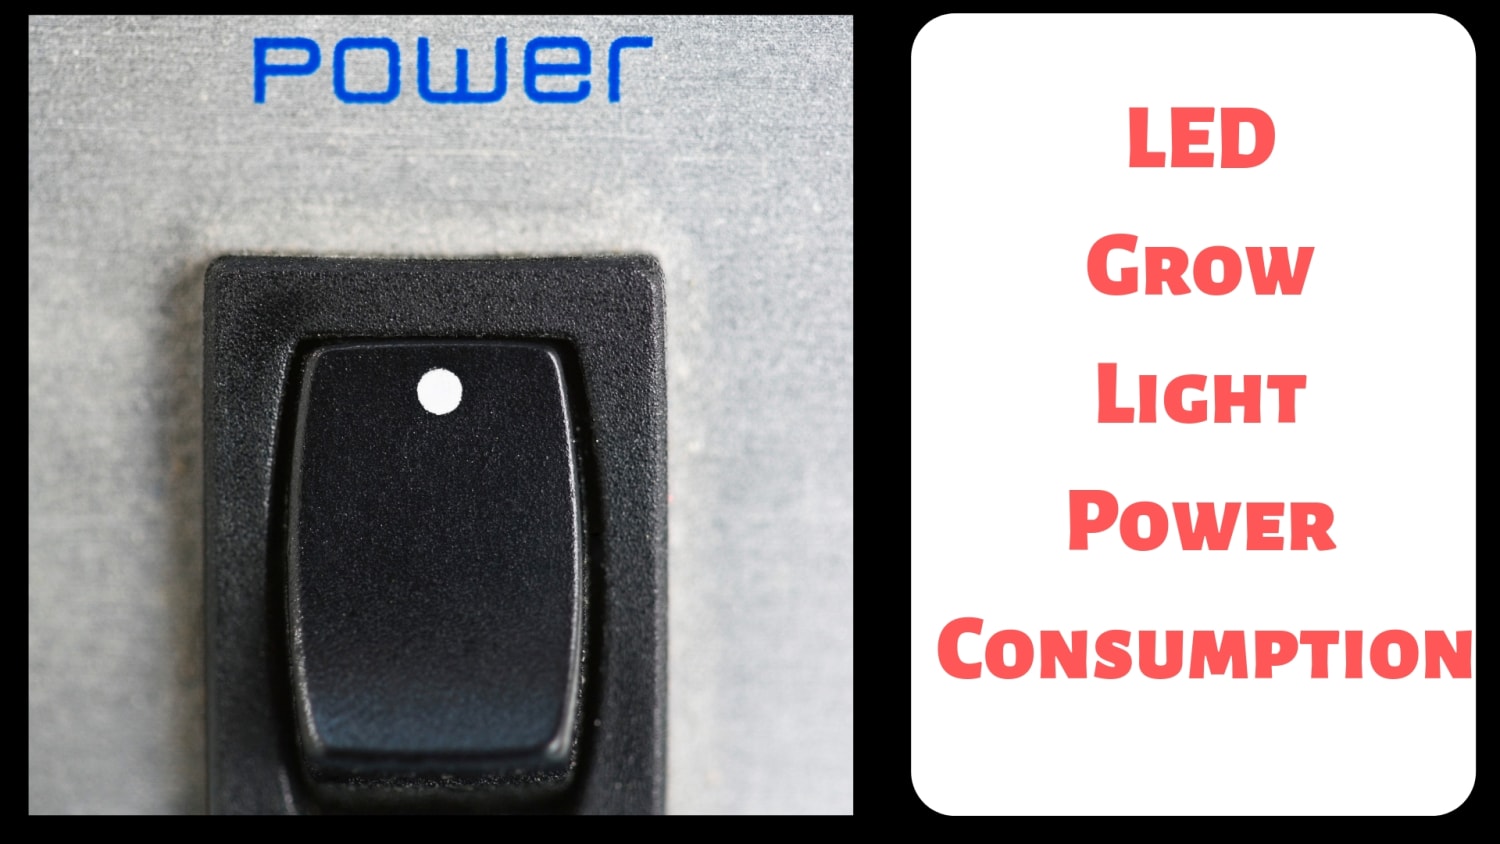 A Look at LED Grow Light Power Consumption